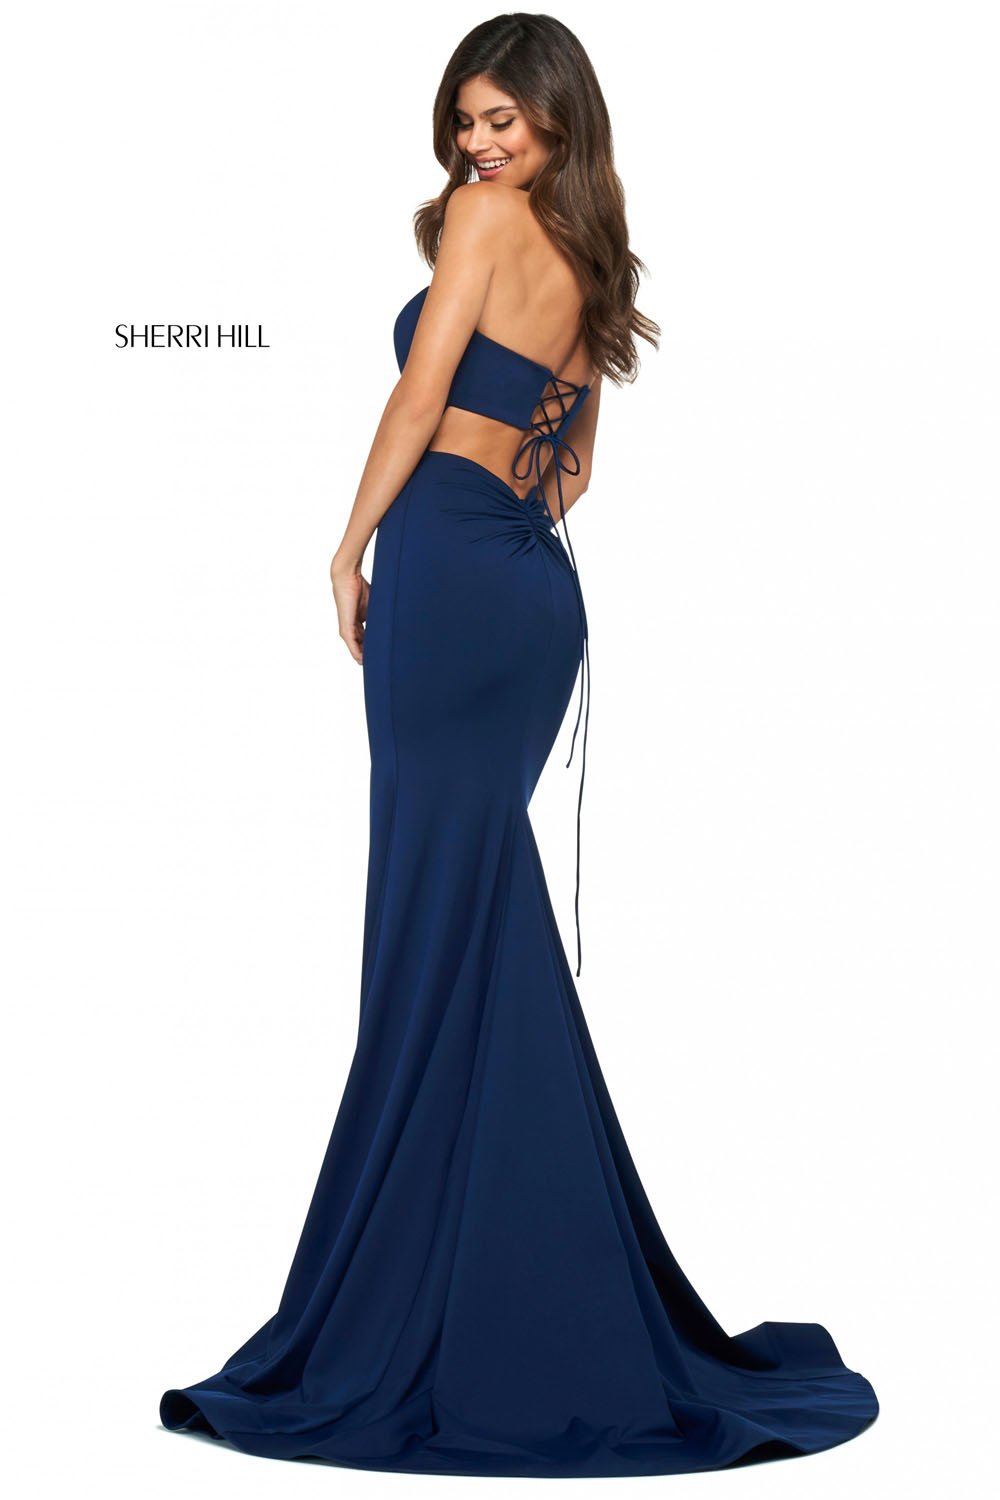 Sherri Hill 53877 dress images in these colors: Navy, Wine, Lilac, Black, Red.